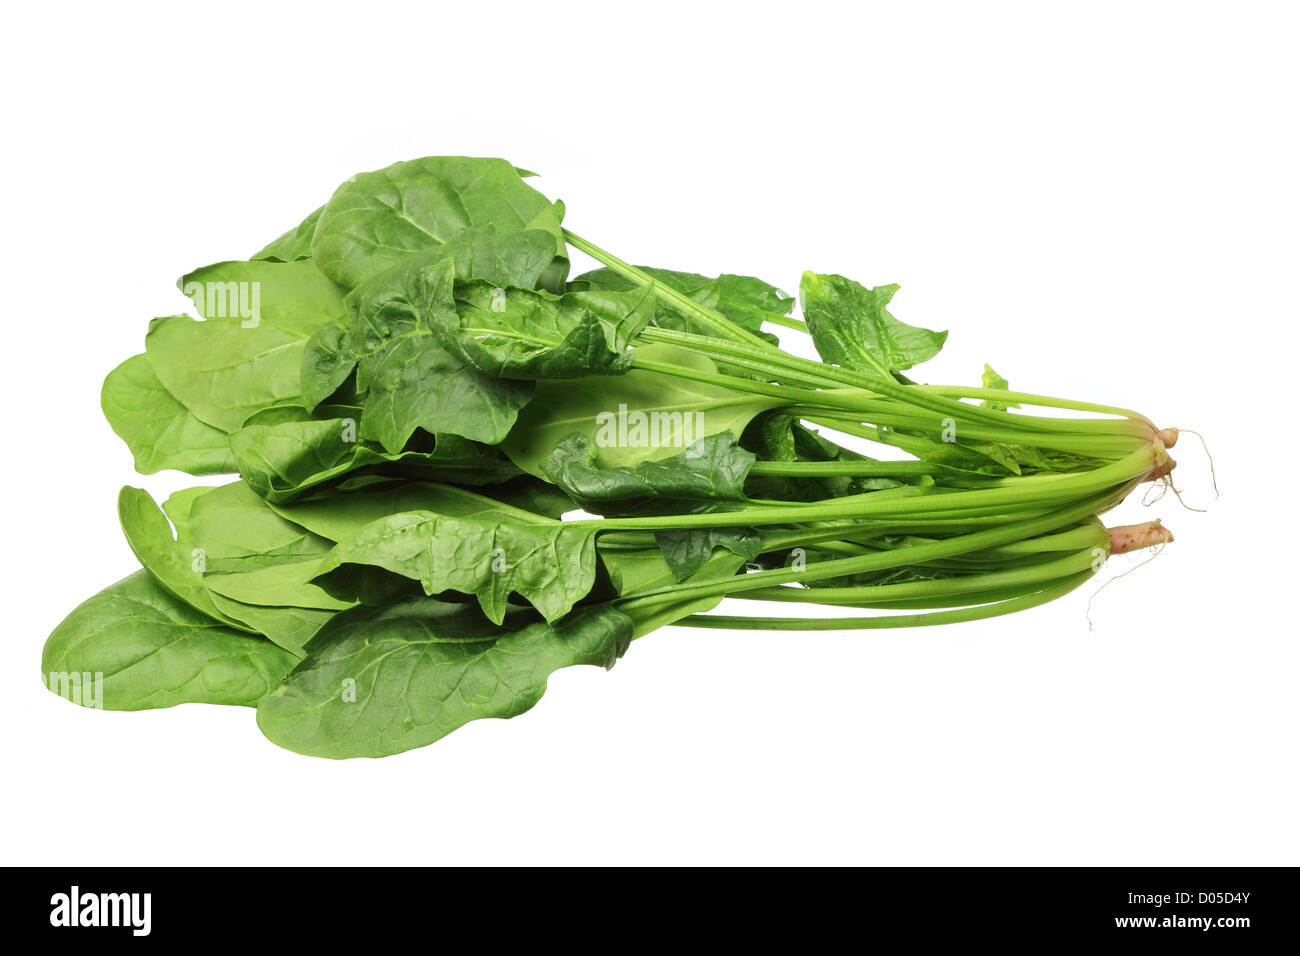 Bunch of Spinach Stock Photo